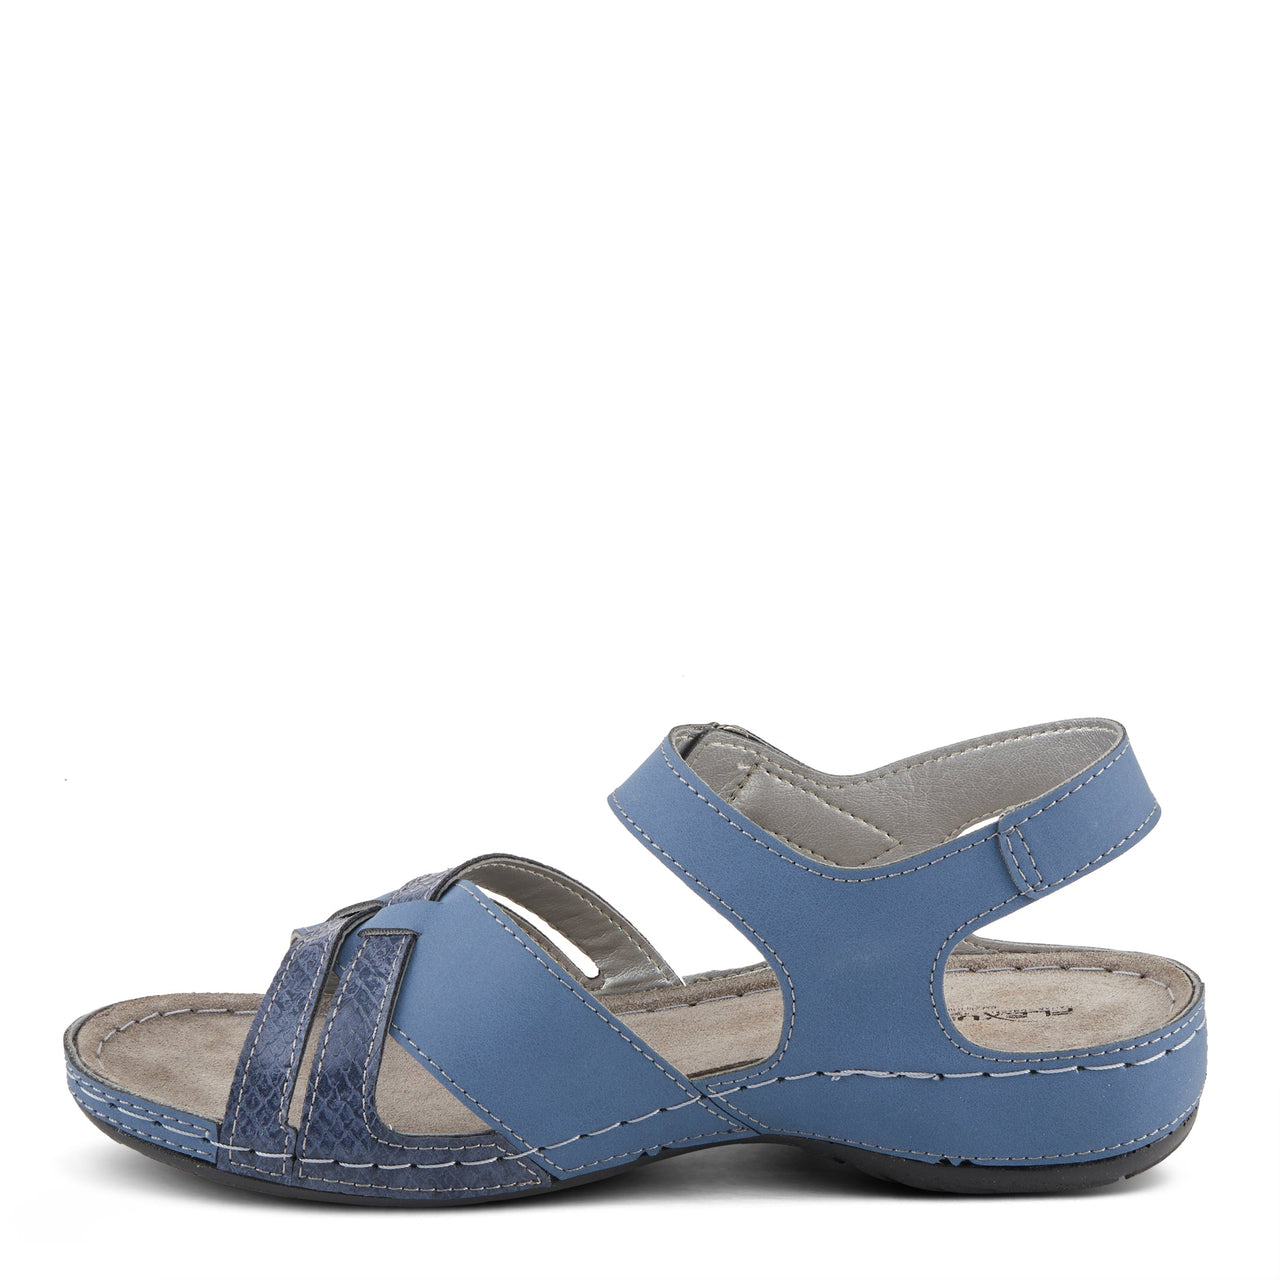 Spring Step Shoes Flexus Alvina Sandals - Lifestyle shot with a woman walking